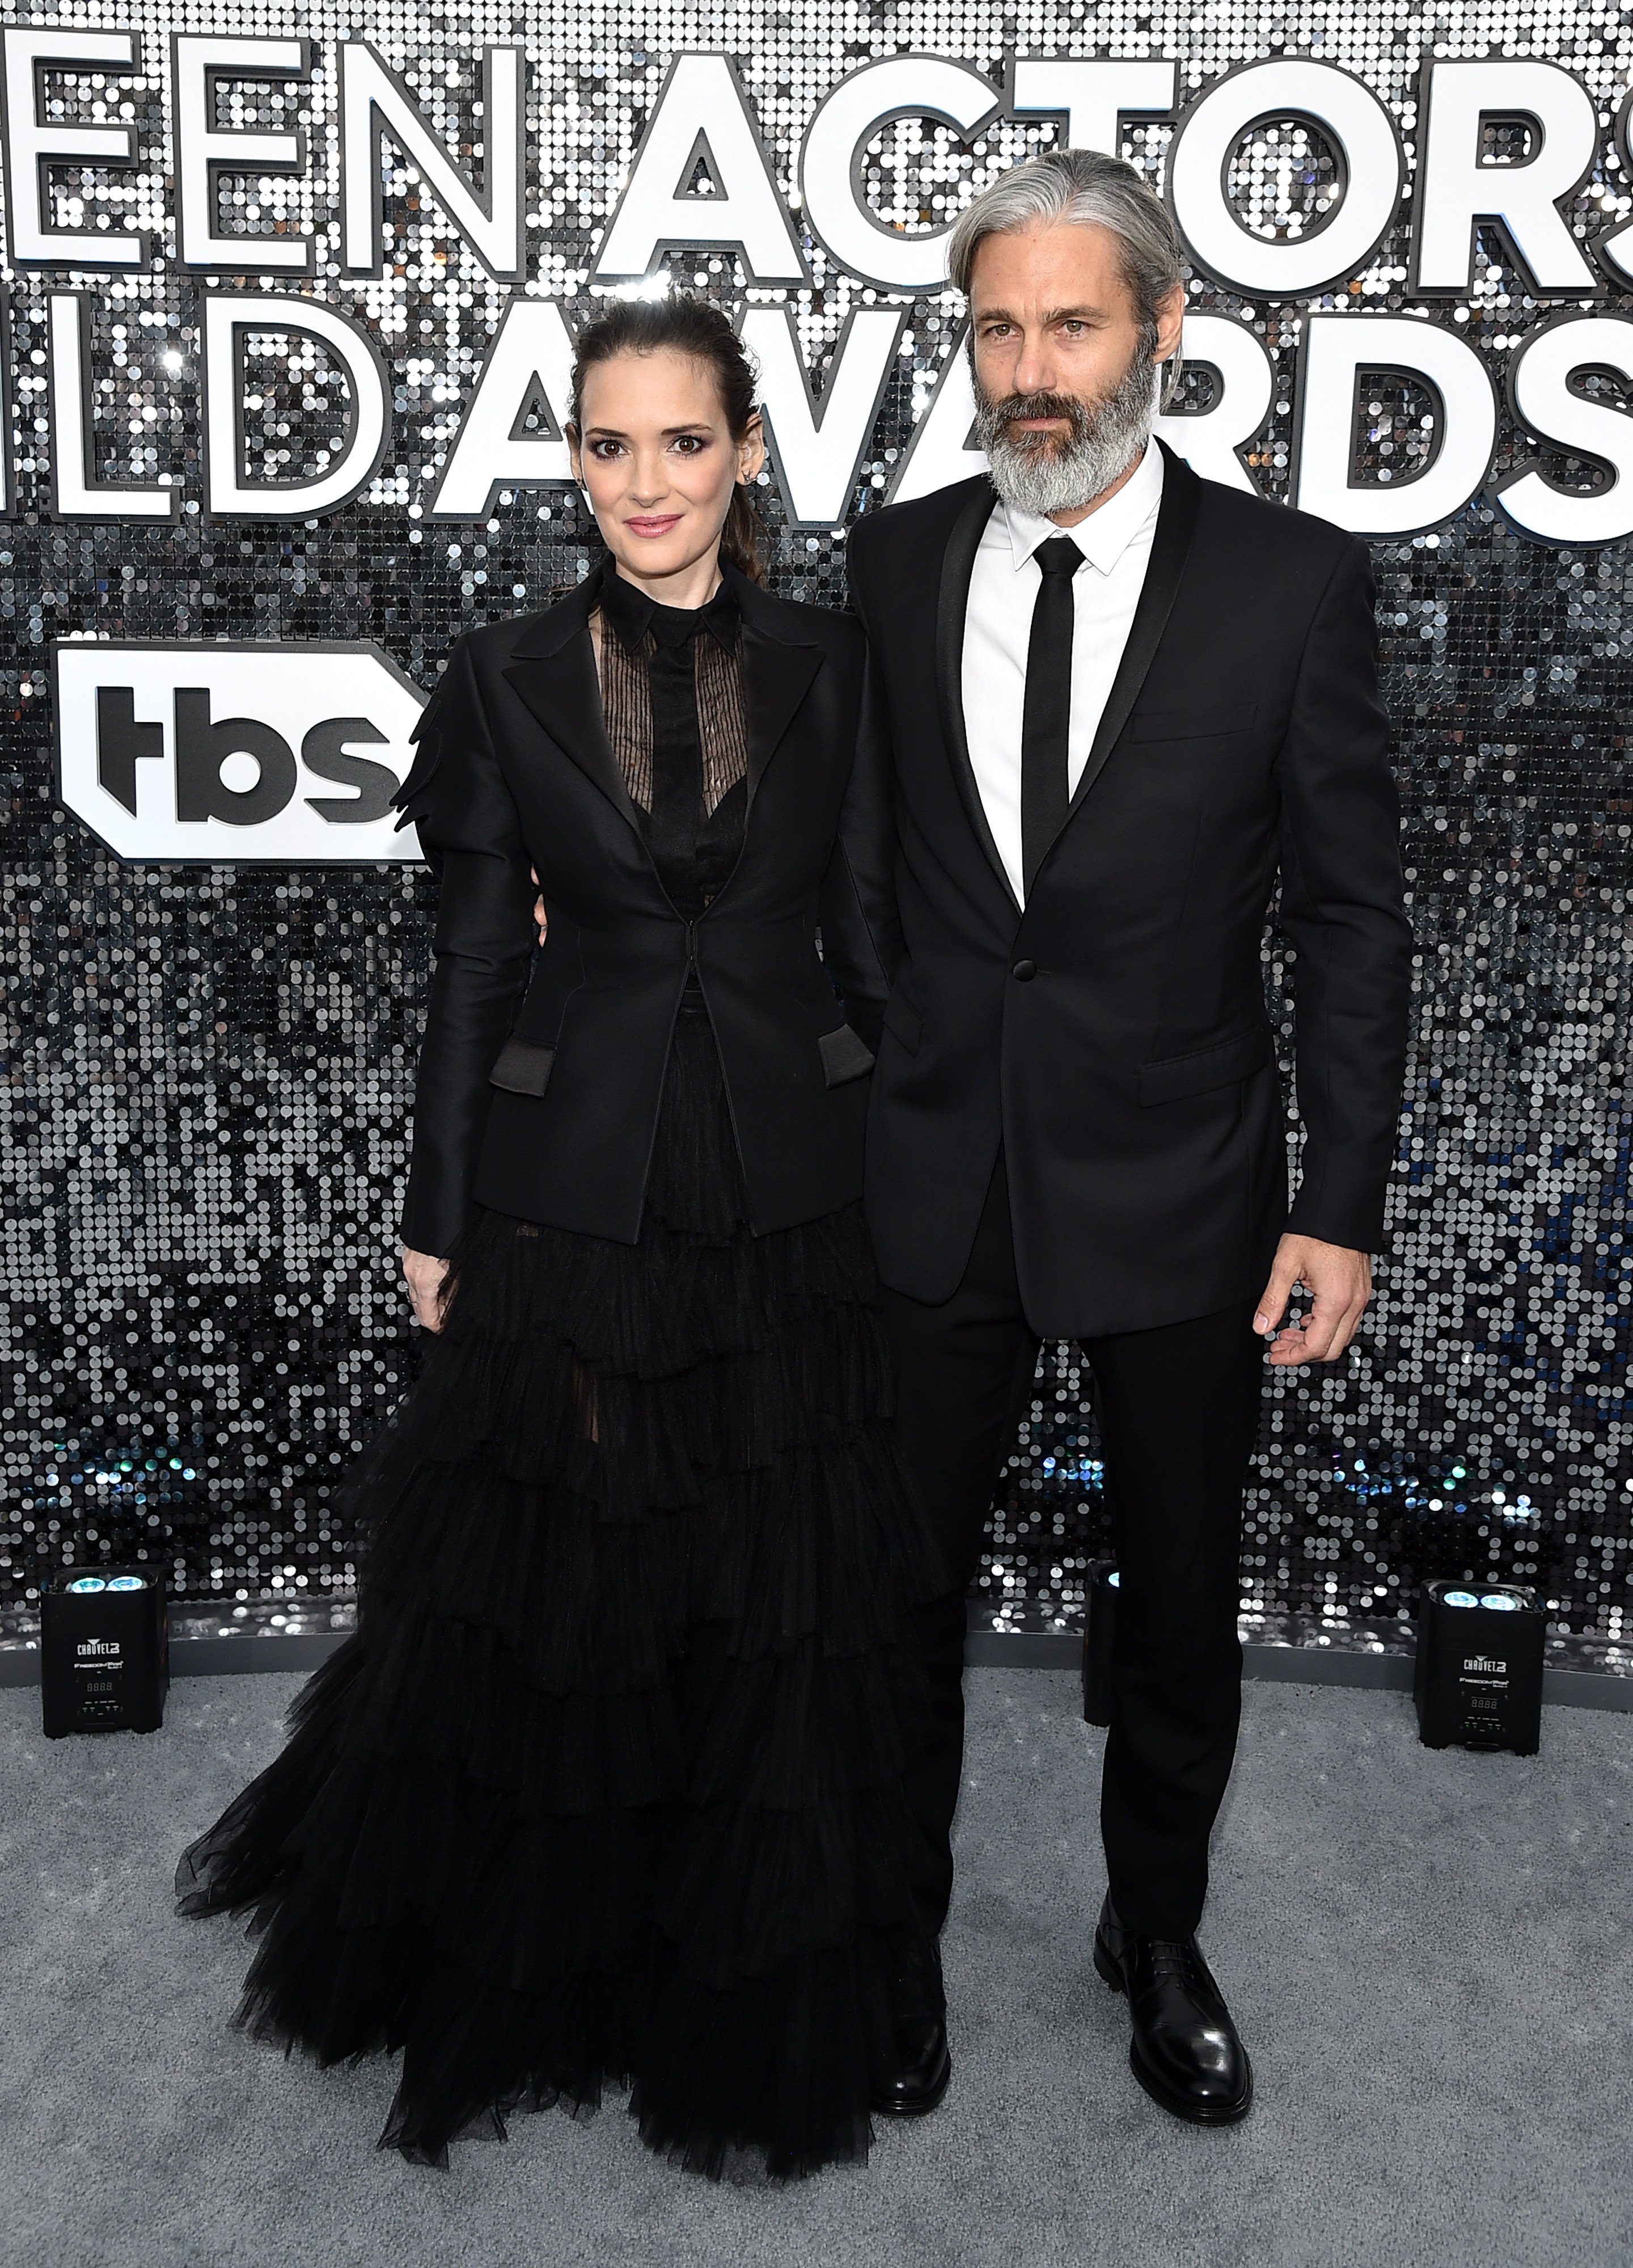 Winona Ryder and Scott Mackinlay Hahn attend the 26th Annual Screen Actors Guild Awards at The Shrine Auditorium on January 19, 2020, in Los Angeles, California. | Source: Getty Images.